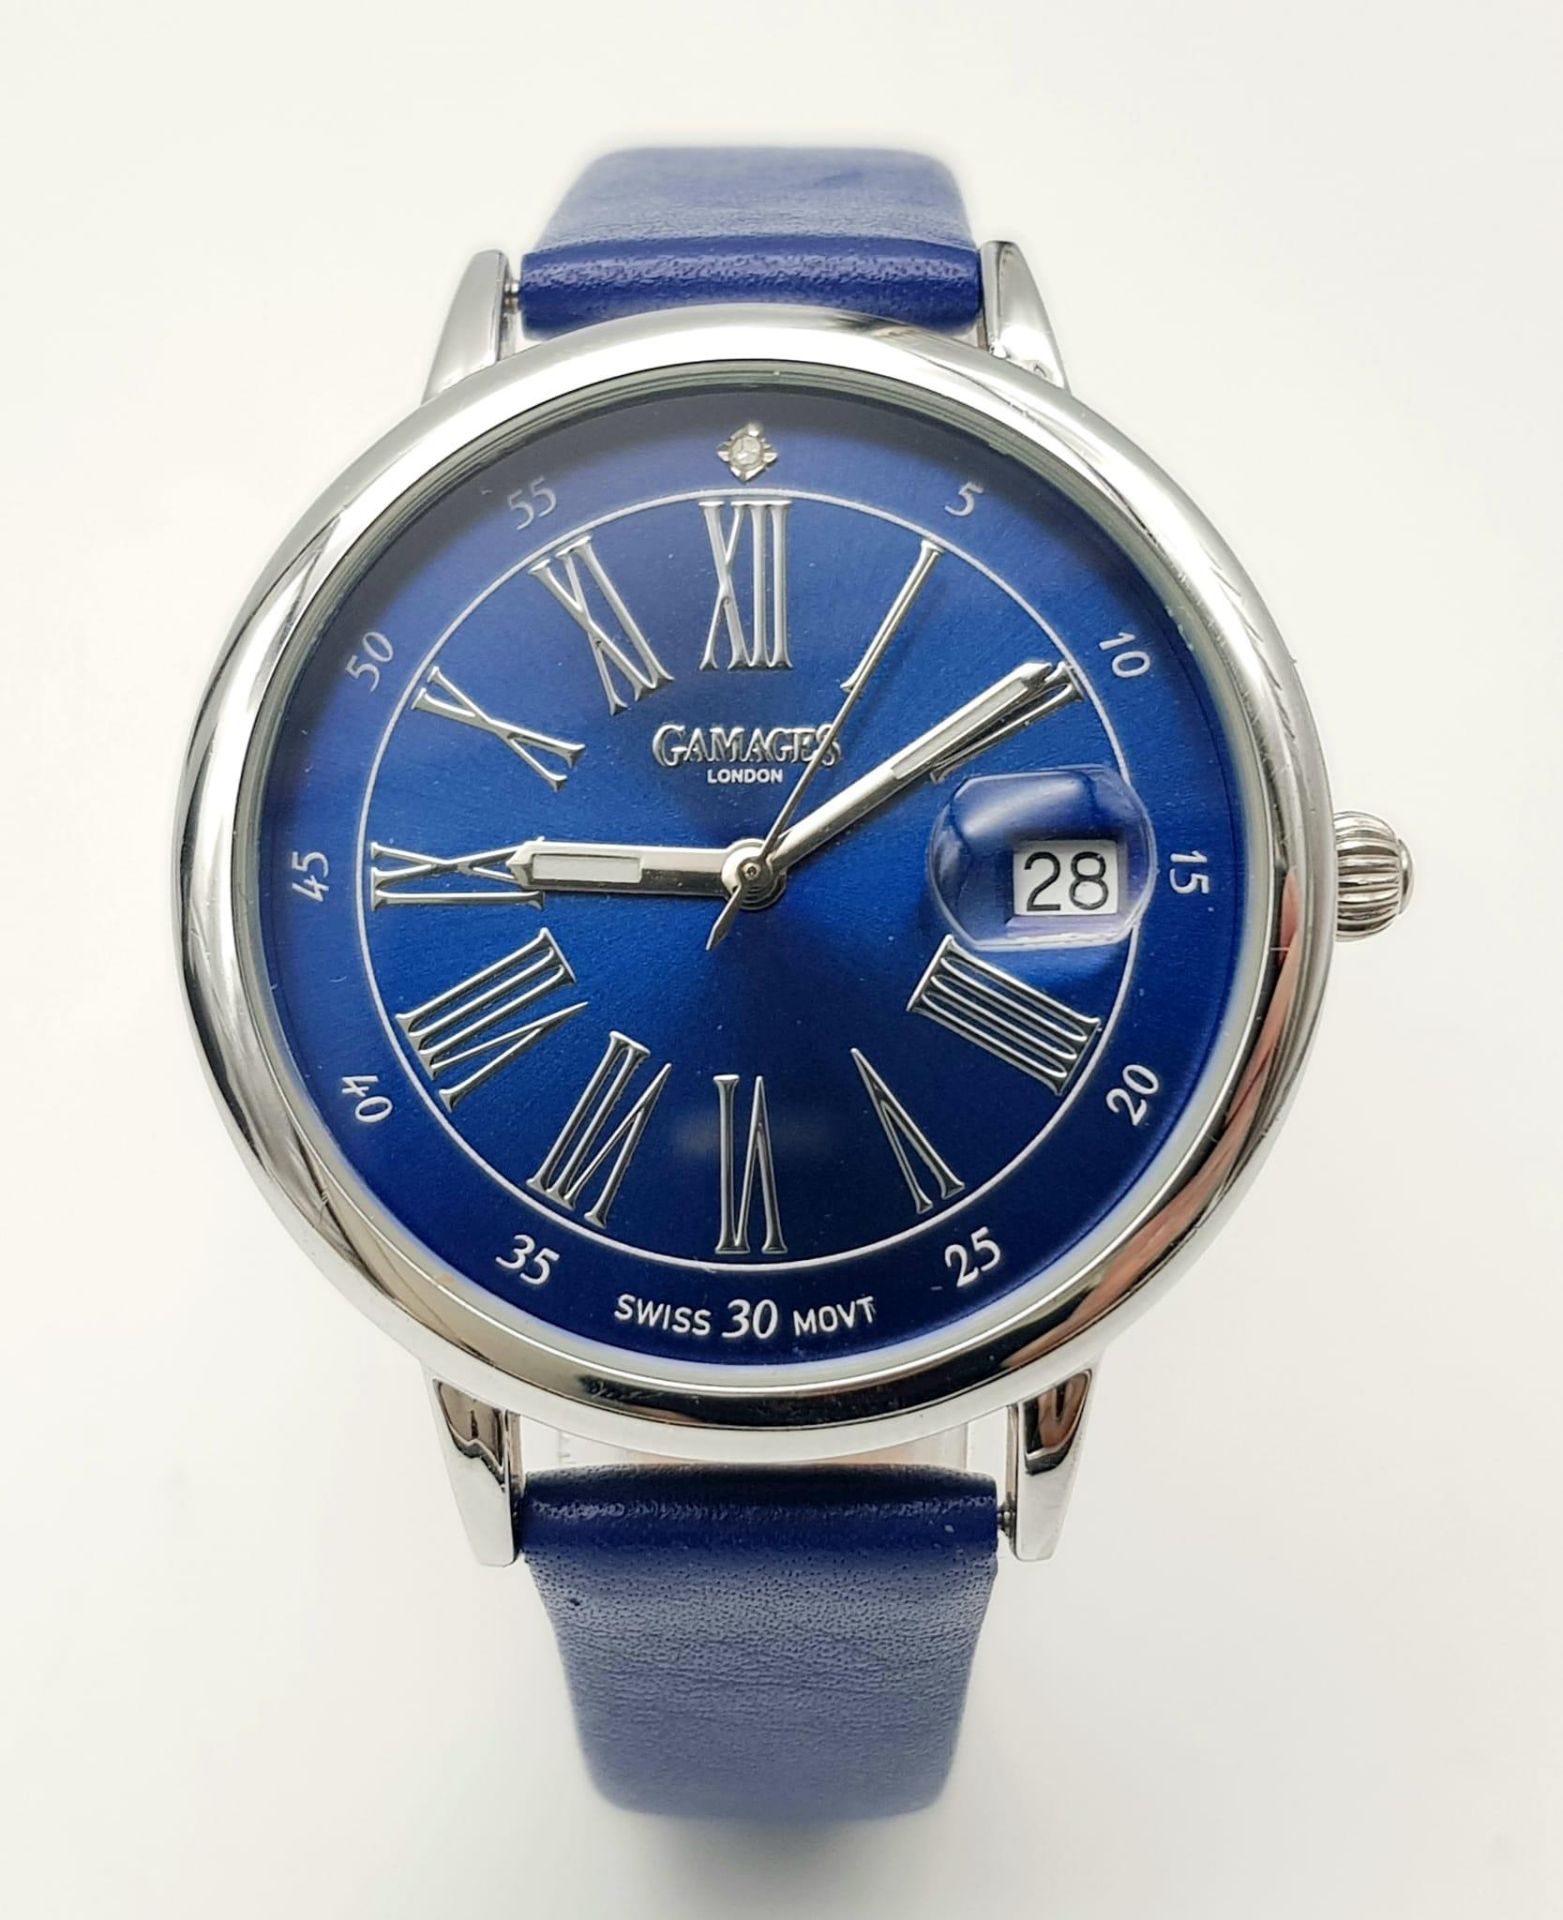 A Gamages of London Quartz Ladies Watch. Blue leather strap. Stainless steel case - 37mm. Ice blue